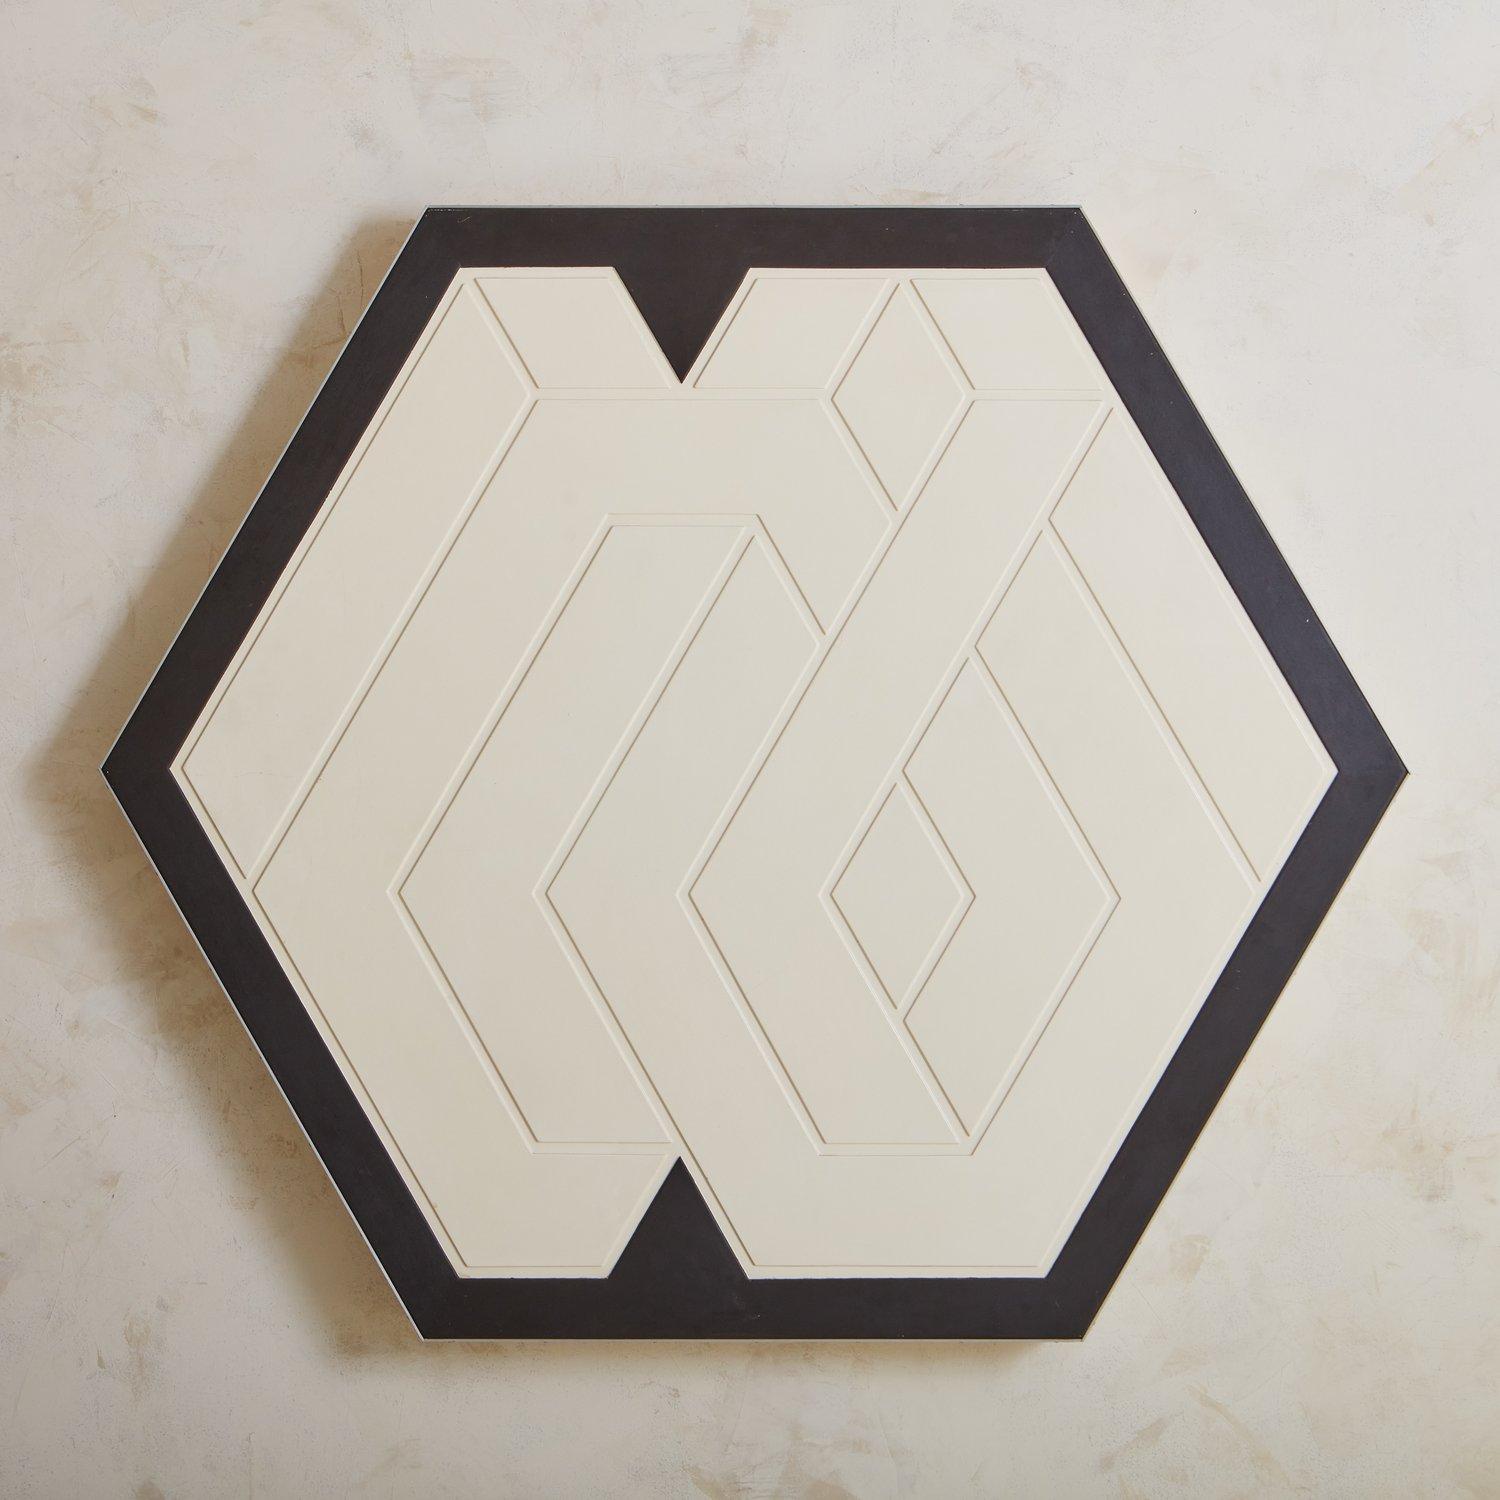 A large-scale wall sculpture titled ‘Statum’ by E.T. Frankland. This striking hexagonal piece has a black painted wood background with a cream lacquered wood textured geometric pattern. With a 3” depth, this piece commands attention and floats